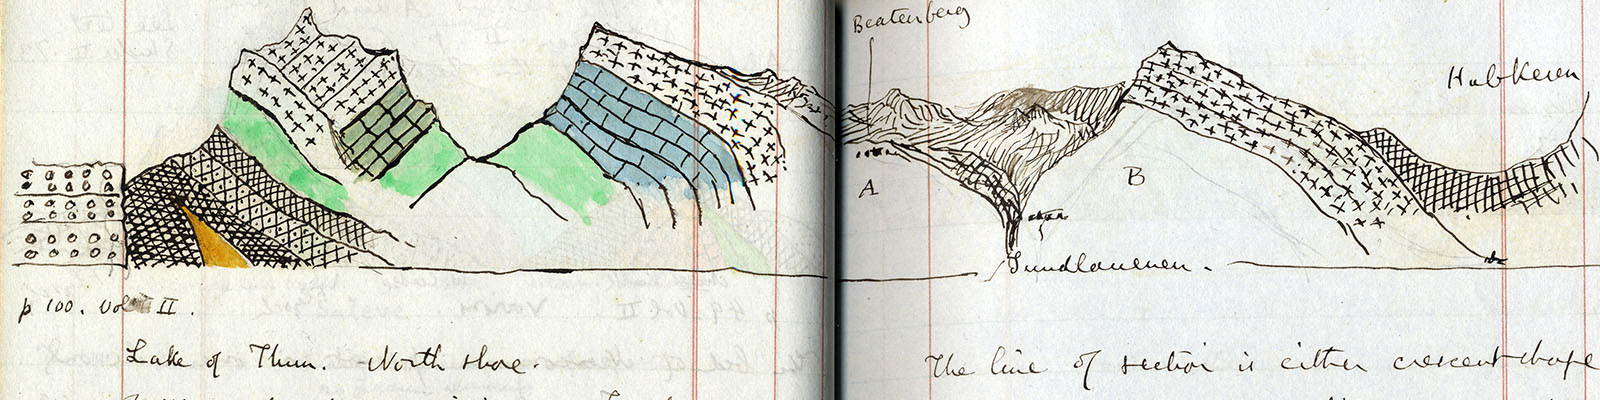 Page from diary manuscript depicting mountains. 